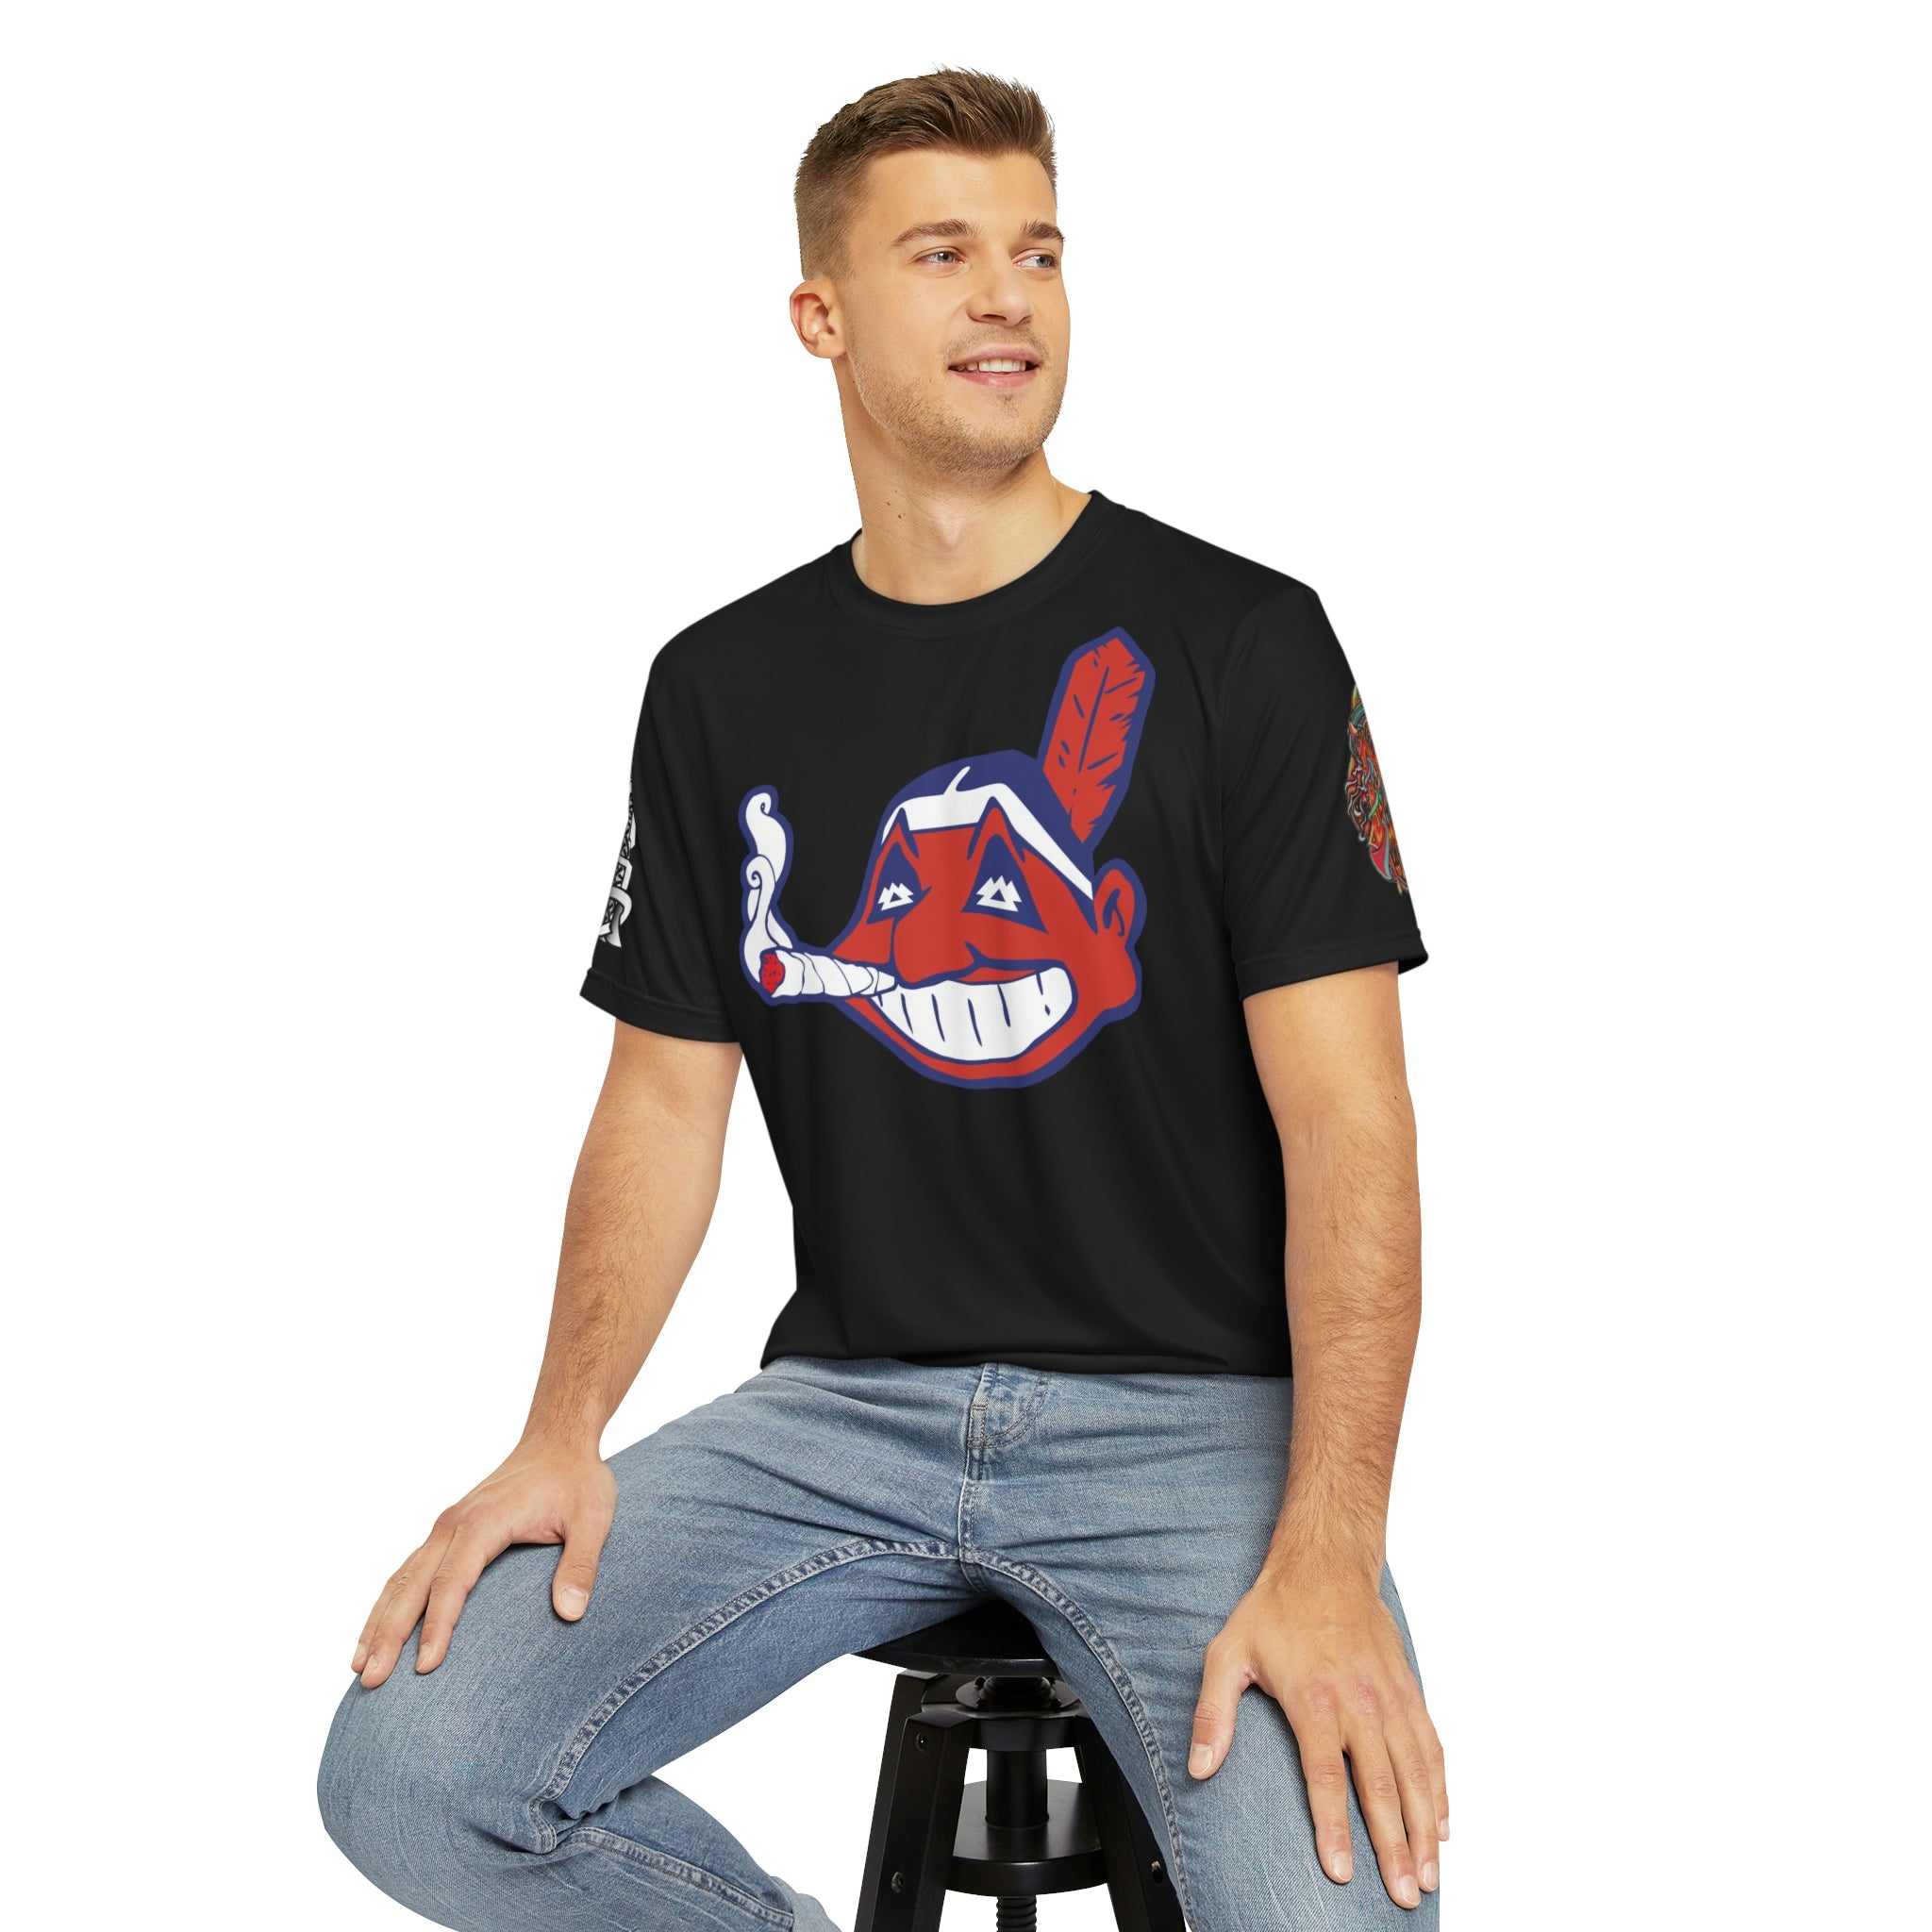 Chiefin Wahoo Men's Polyester Tee Tshirt T-shirt Shirt By Mythical